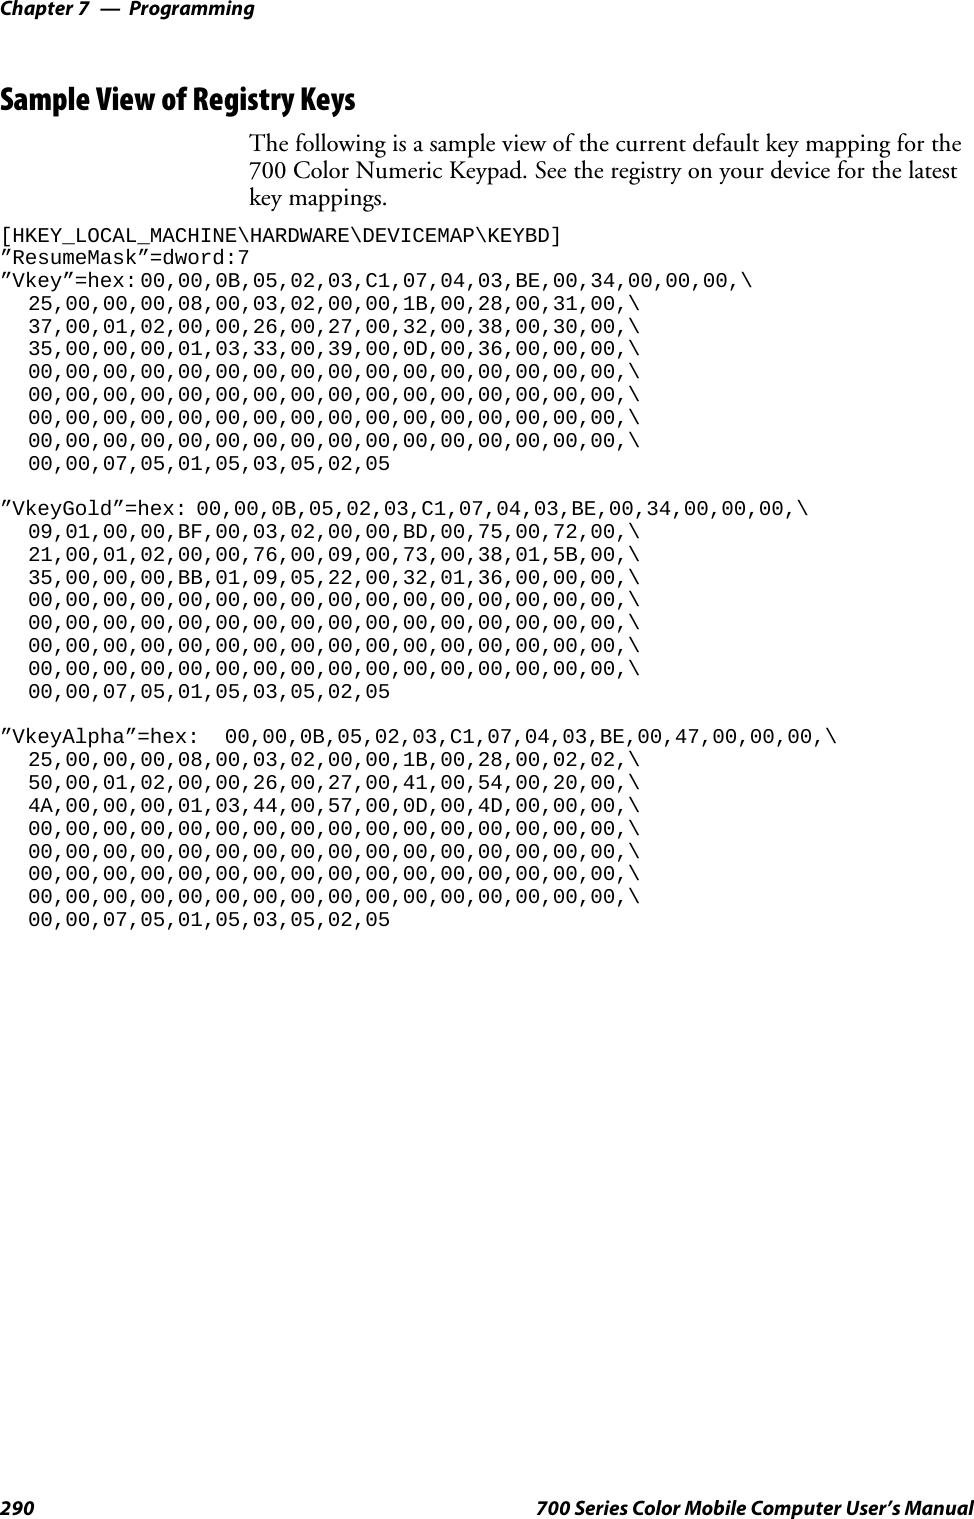 ProgrammingChapter —7290 700 Series Color Mobile Computer User’s ManualSample View of Registry KeysThe following is a sample view of the current default key mapping for the700 Color Numeric Keypad. See the registry on your device for the latestkey mappings.[HKEY_LOCAL_MACHINE\HARDWARE\DEVICEMAP\KEYBD]”ResumeMask”=dword:7”Vkey”=hex: 00,00,0B,05,02,03,C1,07,04,03,BE,00,34,00,00,00,\25,00,00,00,08,00,03,02,00,00,1B,00,28,00,31,00,\37,00,01,02,00,00,26,00,27,00,32,00,38,00,30,00,\35,00,00,00,01,03,33,00,39,00,0D,00,36,00,00,00,\00,00,00,00,00,00,00,00,00,00,00,00,00,00,00,00,\00,00,00,00,00,00,00,00,00,00,00,00,00,00,00,00,\00,00,00,00,00,00,00,00,00,00,00,00,00,00,00,00,\00,00,00,00,00,00,00,00,00,00,00,00,00,00,00,00,\00,00,07,05,01,05,03,05,02,05”VkeyGold”=hex: 00,00,0B,05,02,03,C1,07,04,03,BE,00,34,00,00,00,\09,01,00,00,BF,00,03,02,00,00,BD,00,75,00,72,00,\21,00,01,02,00,00,76,00,09,00,73,00,38,01,5B,00,\35,00,00,00,BB,01,09,05,22,00,32,01,36,00,00,00,\00,00,00,00,00,00,00,00,00,00,00,00,00,00,00,00,\00,00,00,00,00,00,00,00,00,00,00,00,00,00,00,00,\00,00,00,00,00,00,00,00,00,00,00,00,00,00,00,00,\00,00,00,00,00,00,00,00,00,00,00,00,00,00,00,00,\00,00,07,05,01,05,03,05,02,05”VkeyAlpha”=hex: 00,00,0B,05,02,03,C1,07,04,03,BE,00,47,00,00,00,\25,00,00,00,08,00,03,02,00,00,1B,00,28,00,02,02,\50,00,01,02,00,00,26,00,27,00,41,00,54,00,20,00,\4A,00,00,00,01,03,44,00,57,00,0D,00,4D,00,00,00,\00,00,00,00,00,00,00,00,00,00,00,00,00,00,00,00,\00,00,00,00,00,00,00,00,00,00,00,00,00,00,00,00,\00,00,00,00,00,00,00,00,00,00,00,00,00,00,00,00,\00,00,00,00,00,00,00,00,00,00,00,00,00,00,00,00,\00,00,07,05,01,05,03,05,02,05